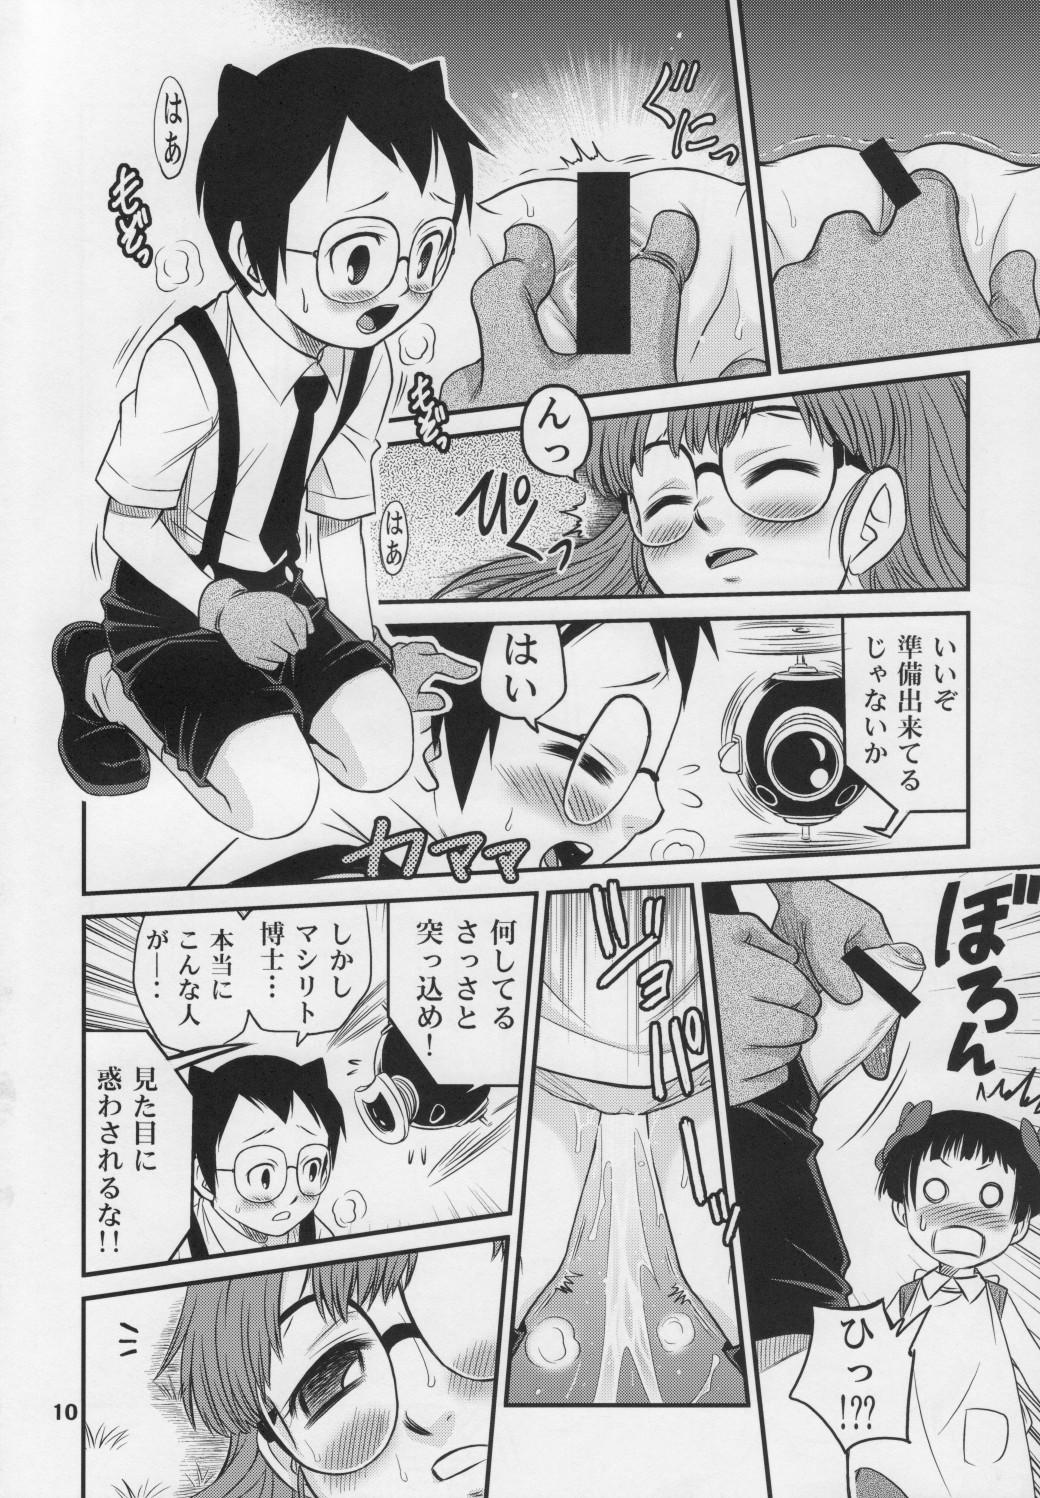 Swallowing Project Arale 3 - Dr. slump Amature Sex - Page 9